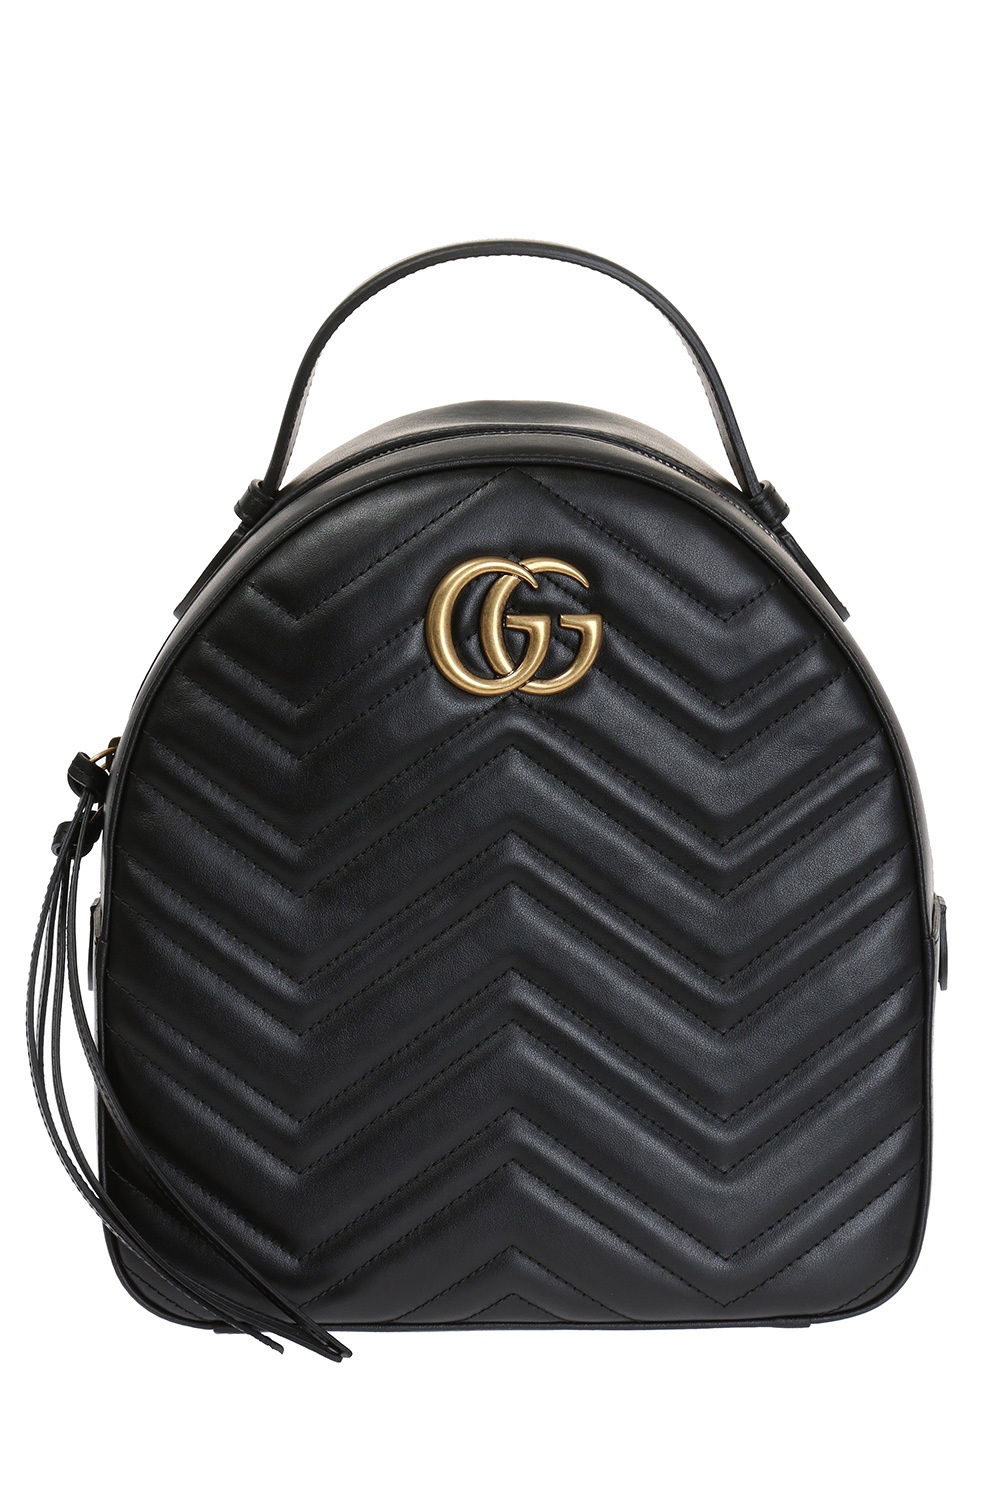 BALO NỮ GUCCI MARMONT BACKPACK 14